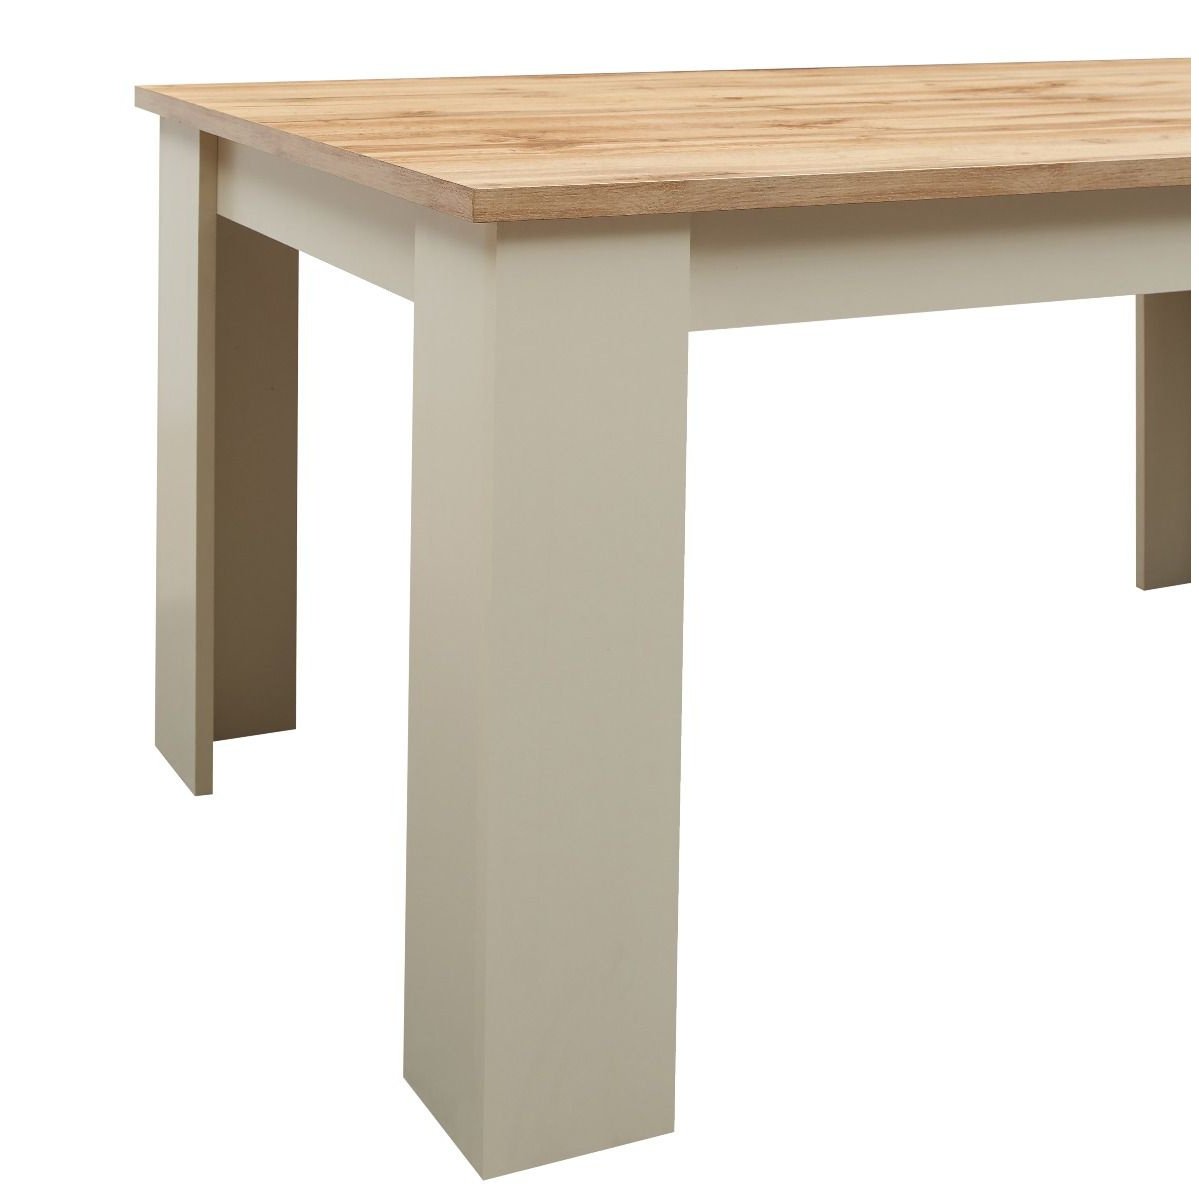 Lisbon 120cm Dining Table with 2 Benches